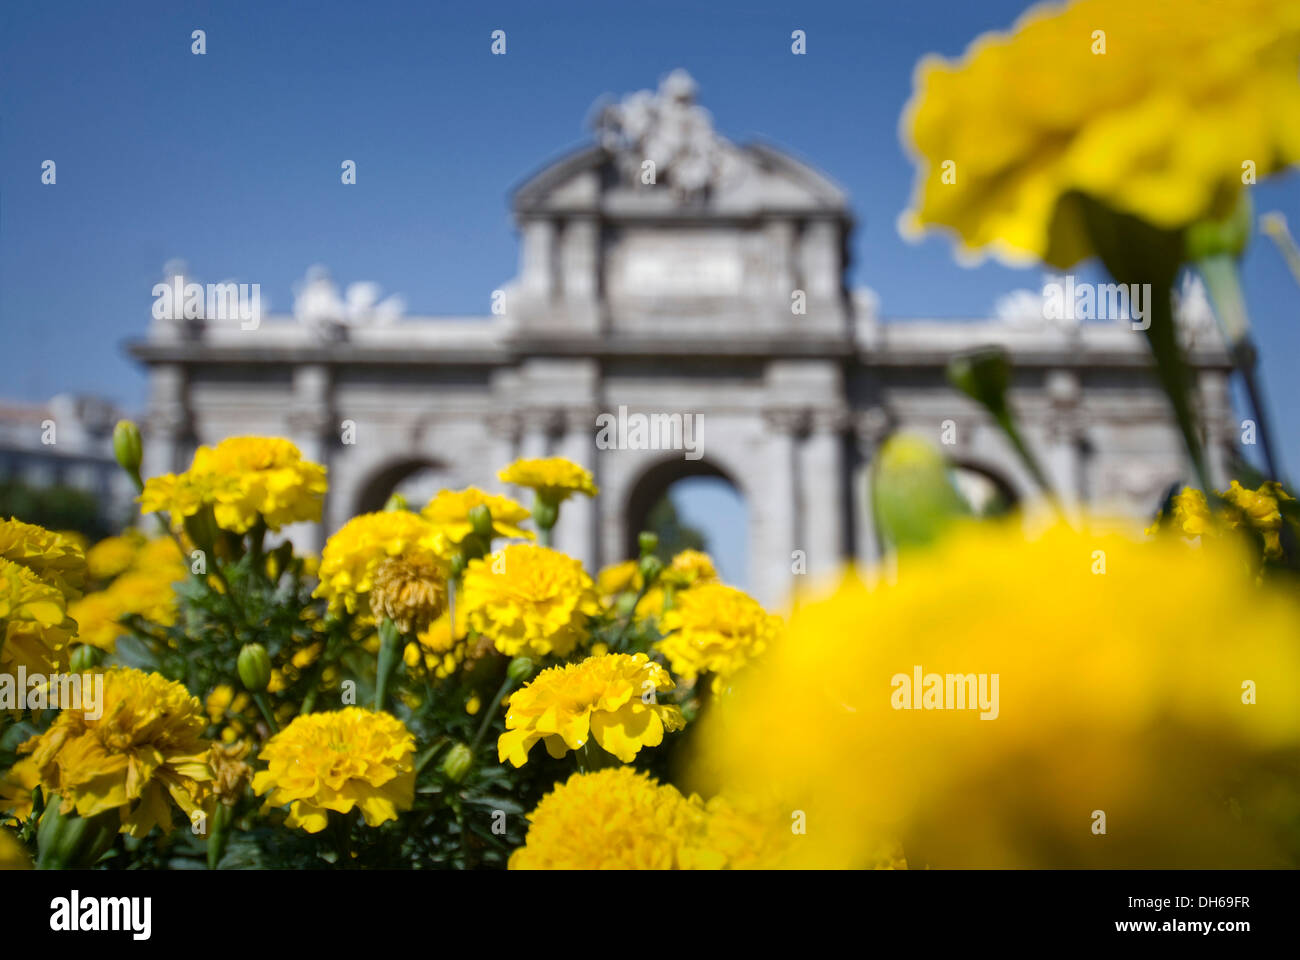 Yellow marigold flowers in front of the Puerta de Alcala in Madrid, Spain, Europe Stock Photo